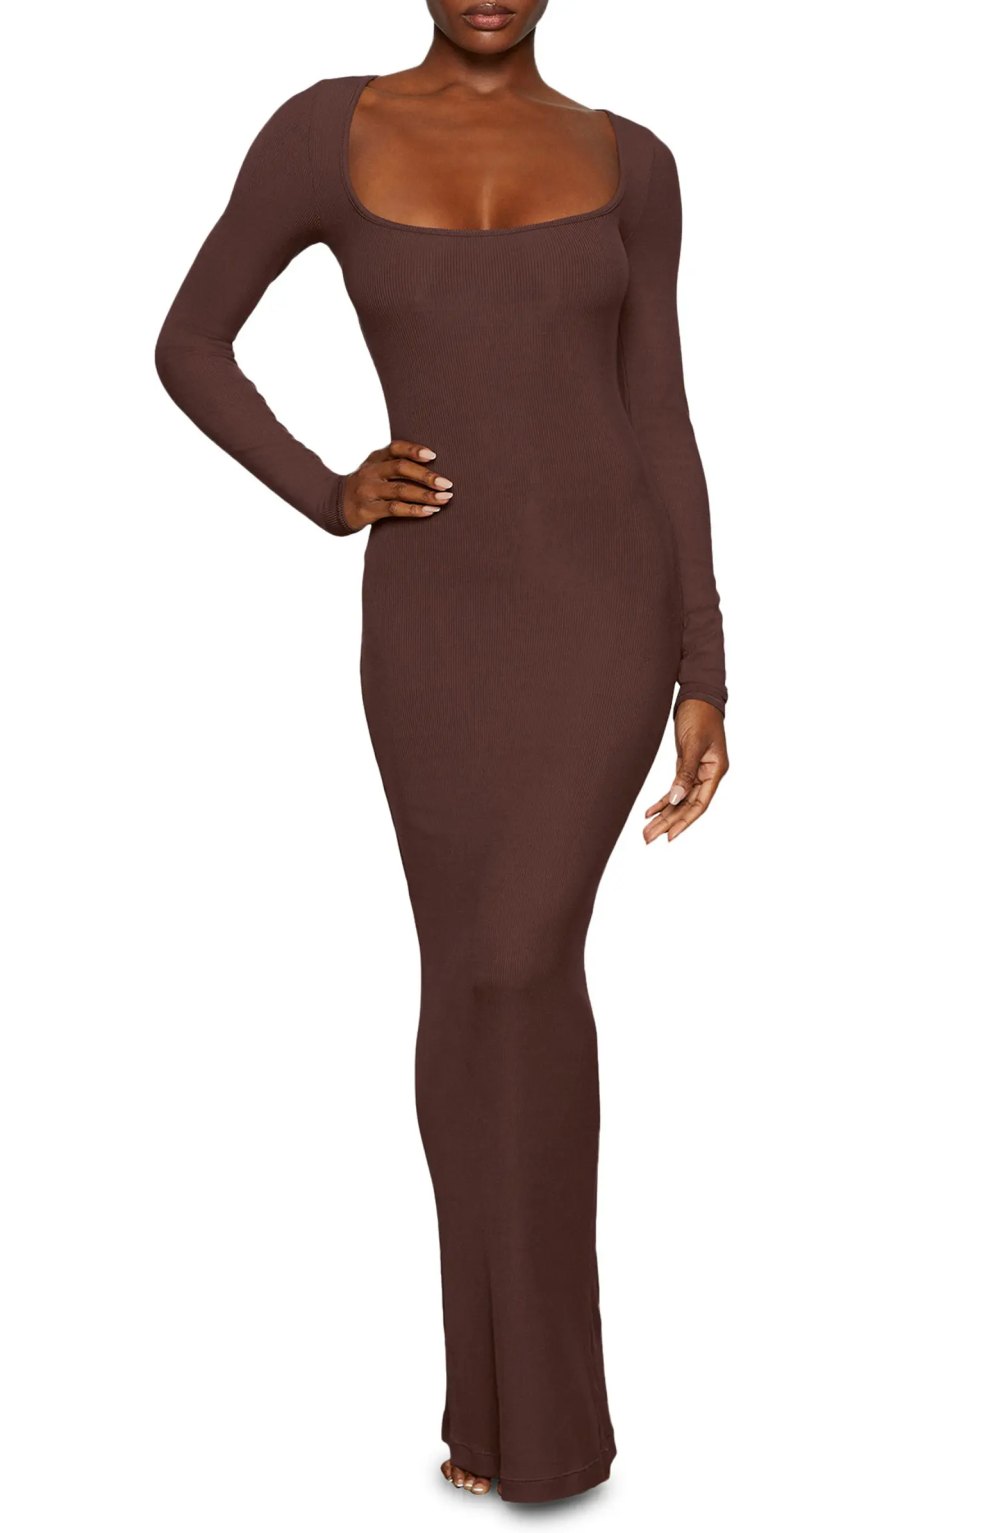 This Soft Skims Lounge Dress Fits Like a Glove — Shop Now